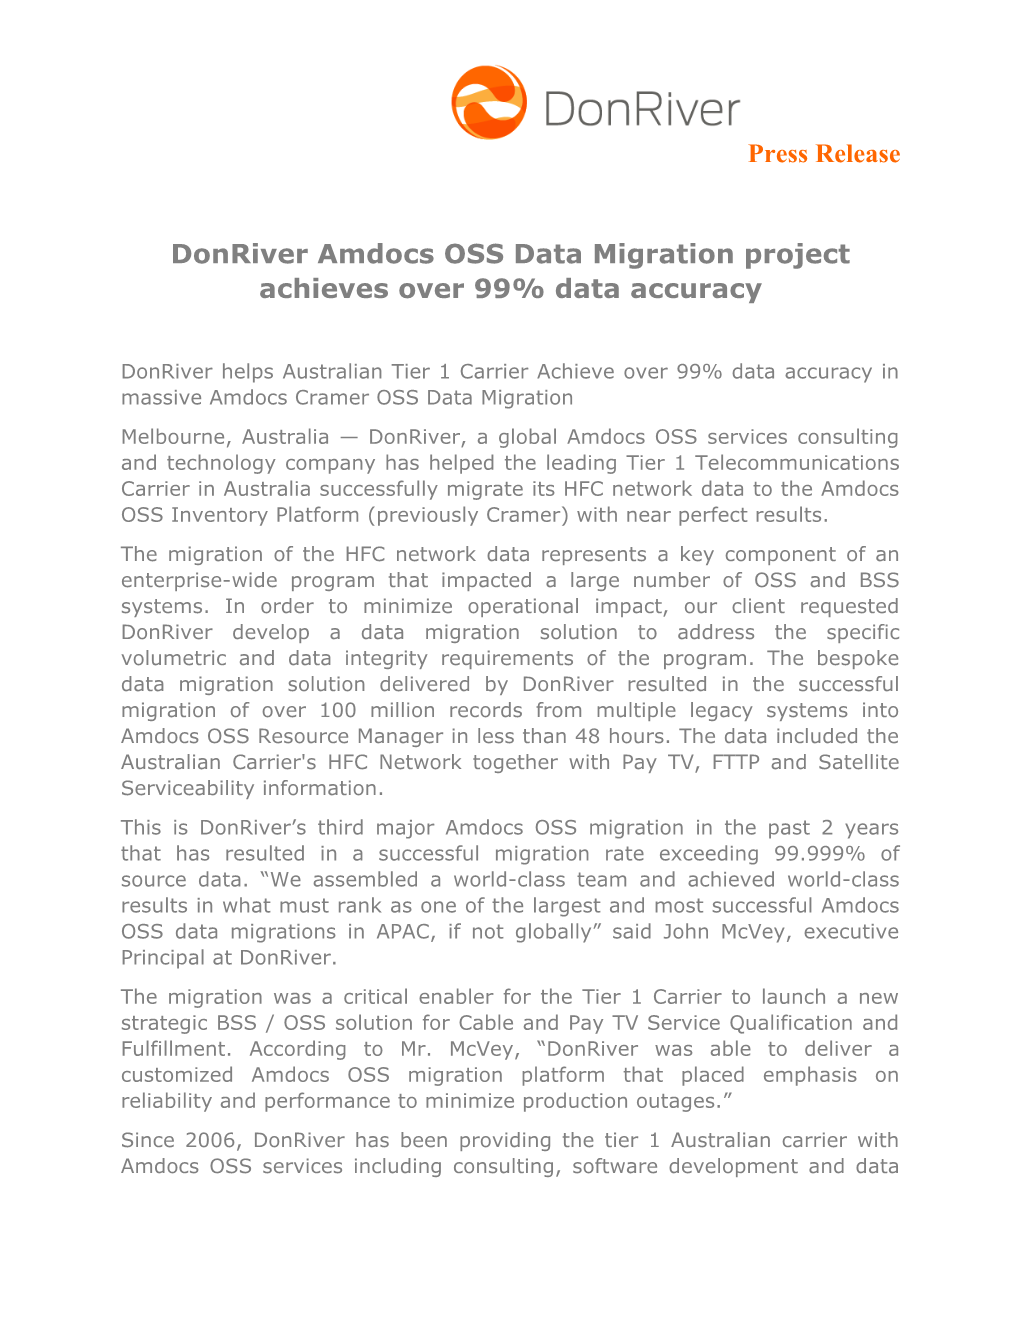 Donriver Amdocs OSS Data Migration Project Achieves Over 99% Data Accuracy